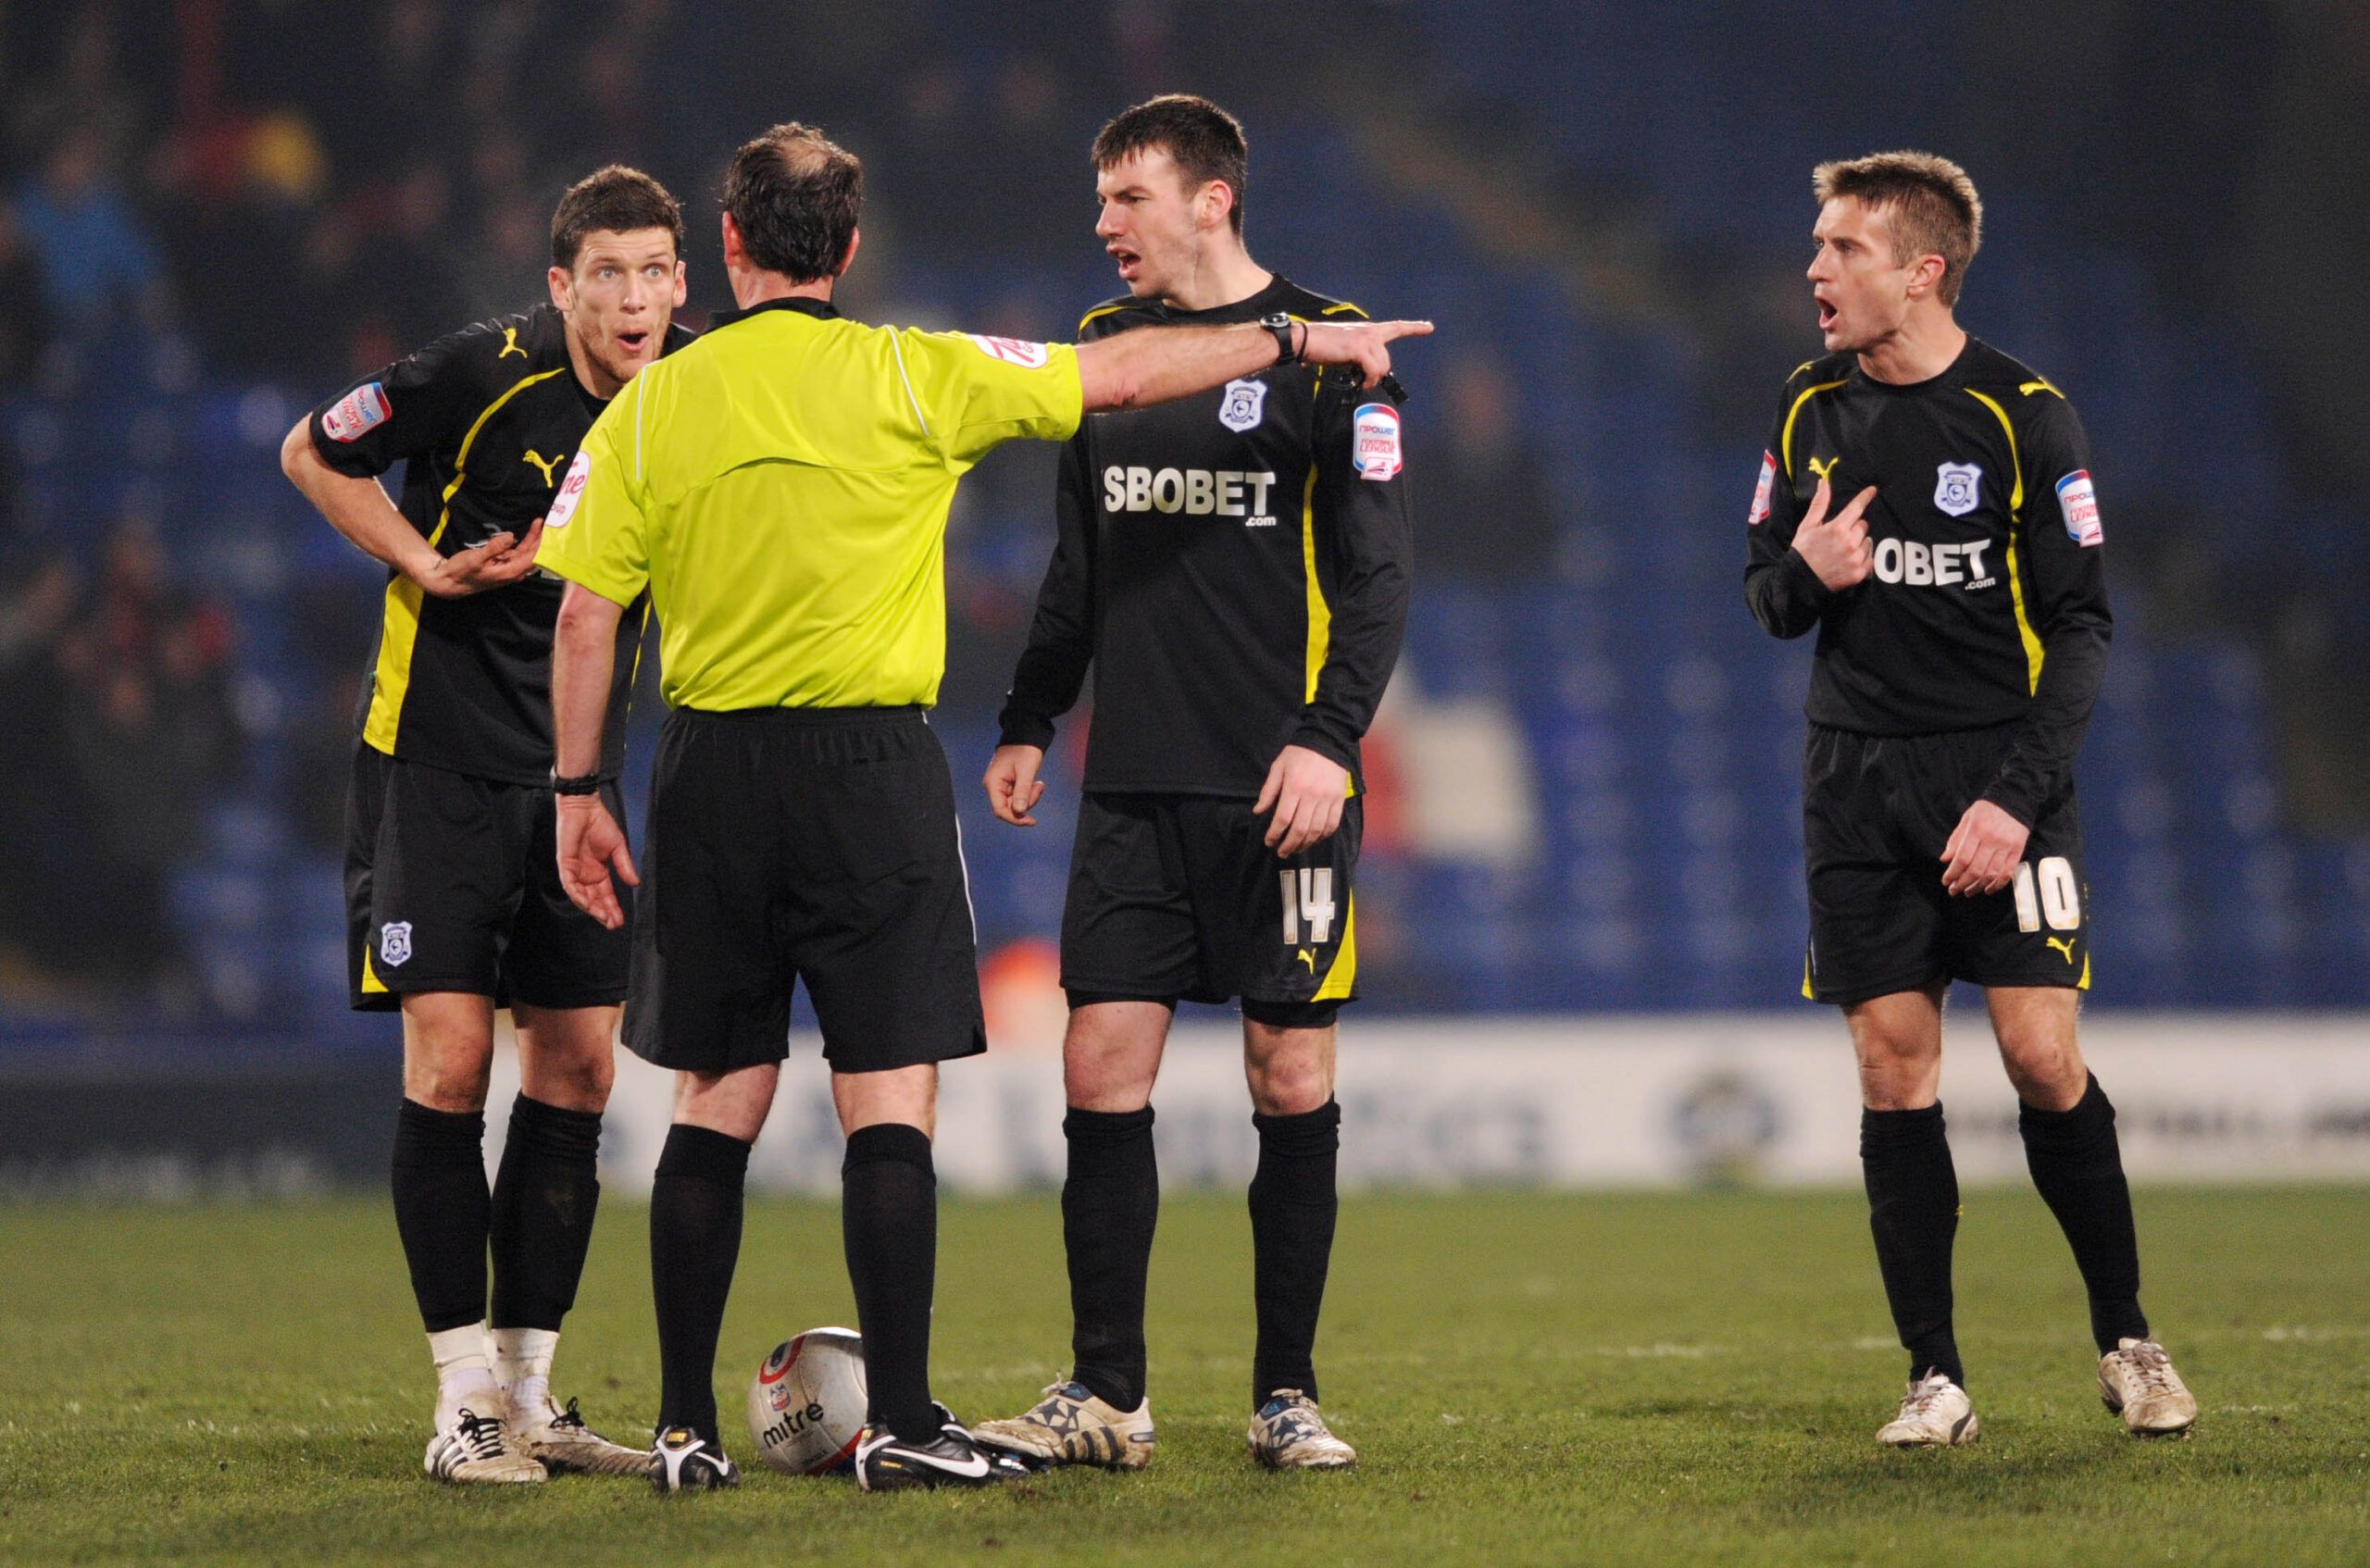 Football - Crystal Palace v Cardiff City npower Football League Championship  - Selhurst Park - 10/11 -  8/3/11 
Cardiff's Mark Hudson (L), Paul Quinn and Stephen McPhail (R) remonstrate with referee Mick Russell 
Mandatory Credit: Action Images / Alex Morton 
Livepic